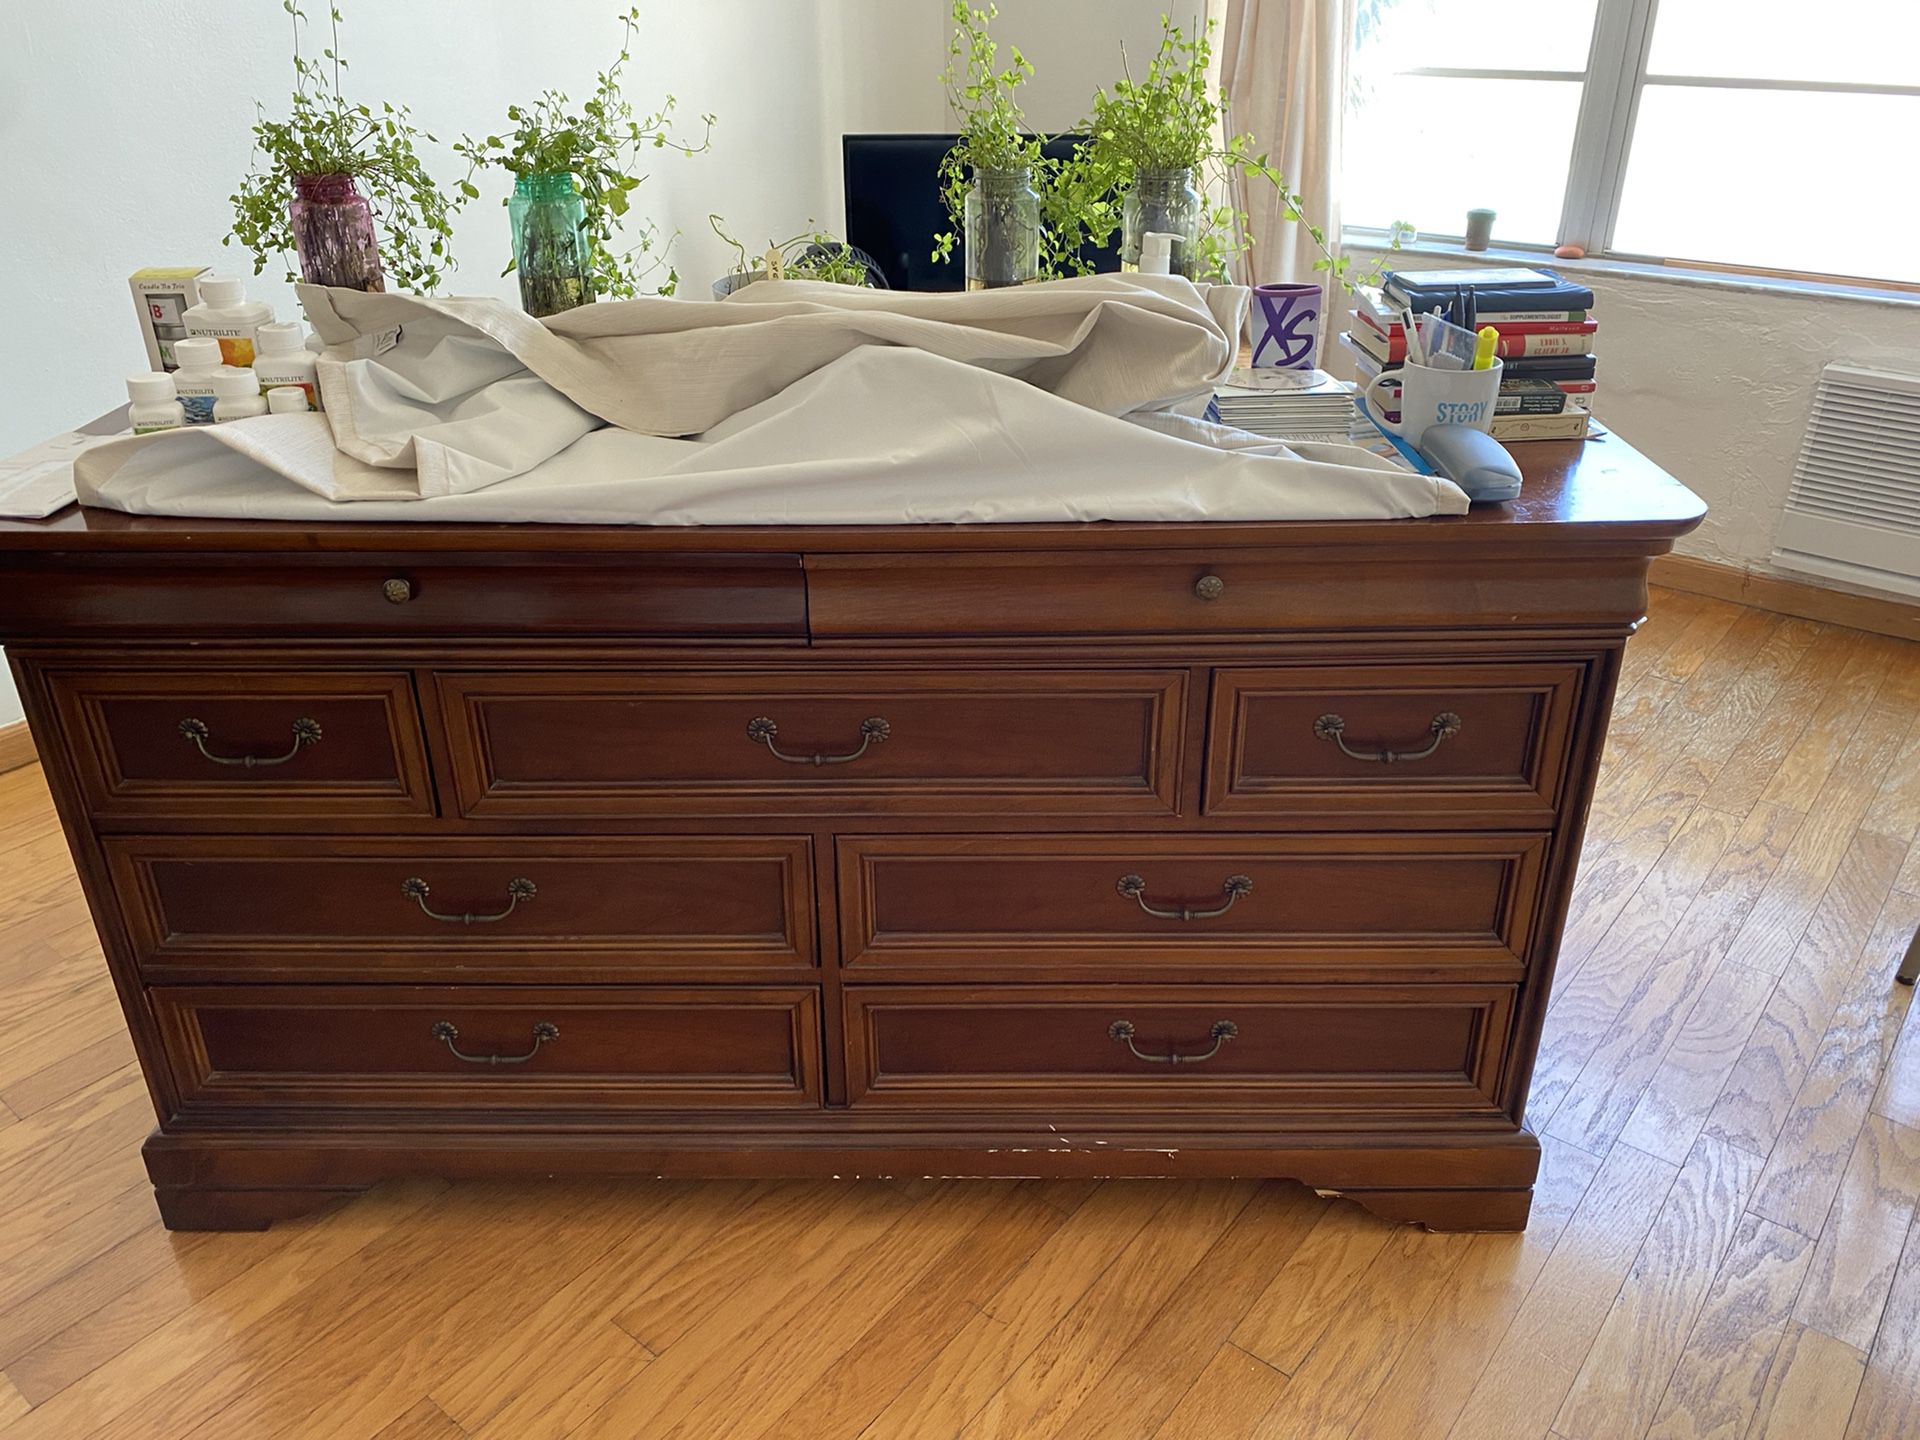 6 ft wide nice wooded dresser. Perfect for storage and in good condition